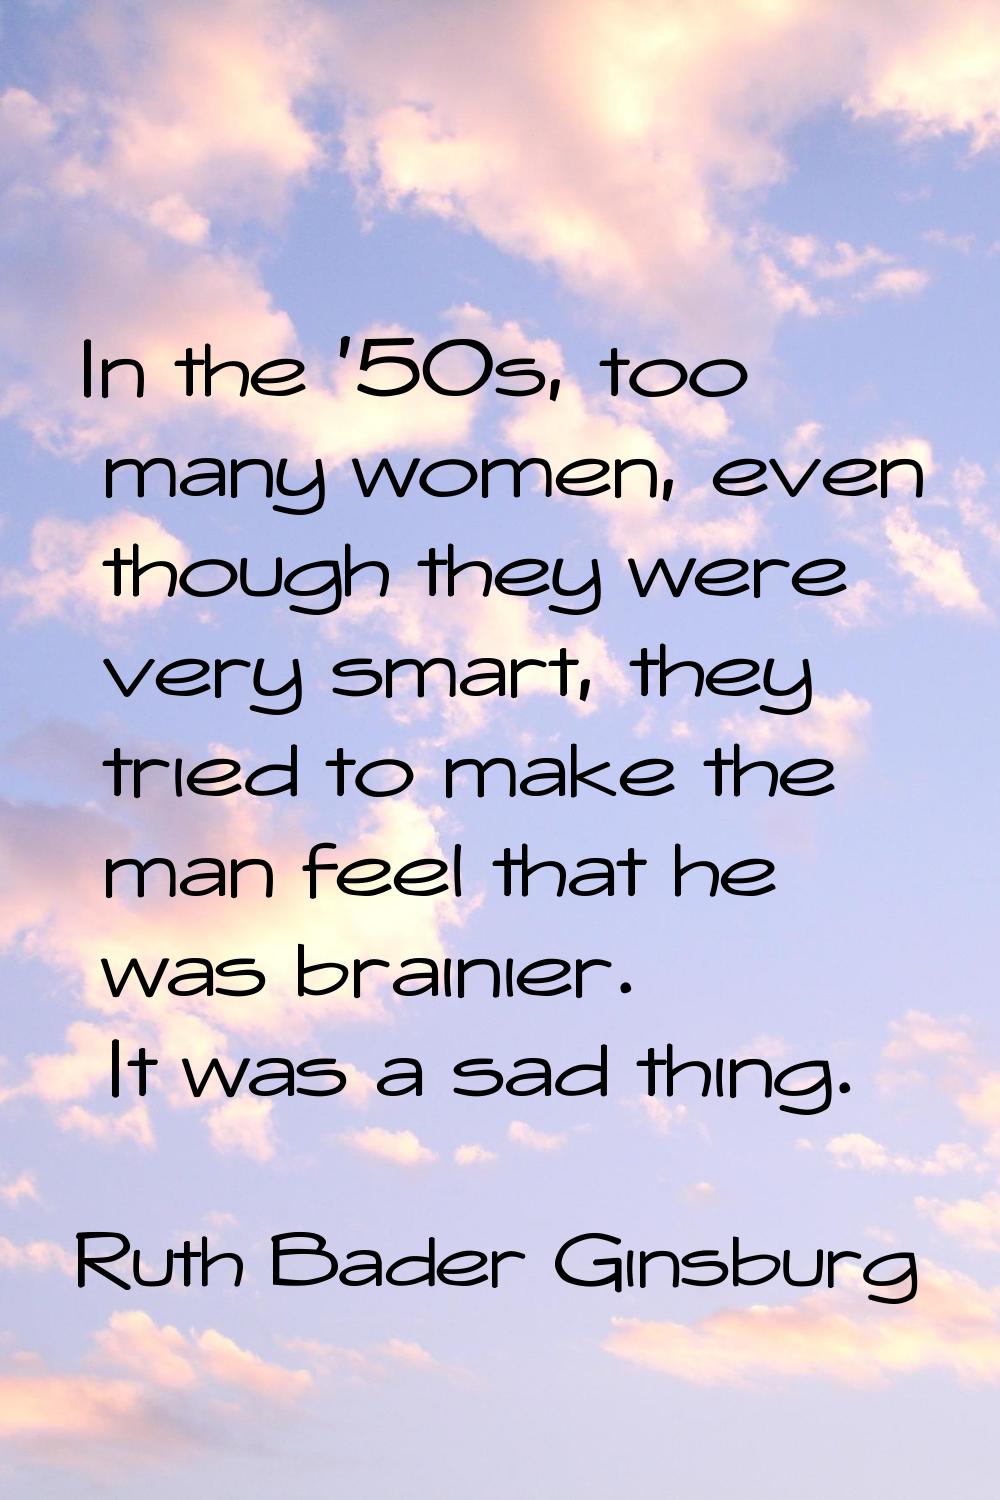 In the '50s, too many women, even though they were very smart, they tried to make the man feel that